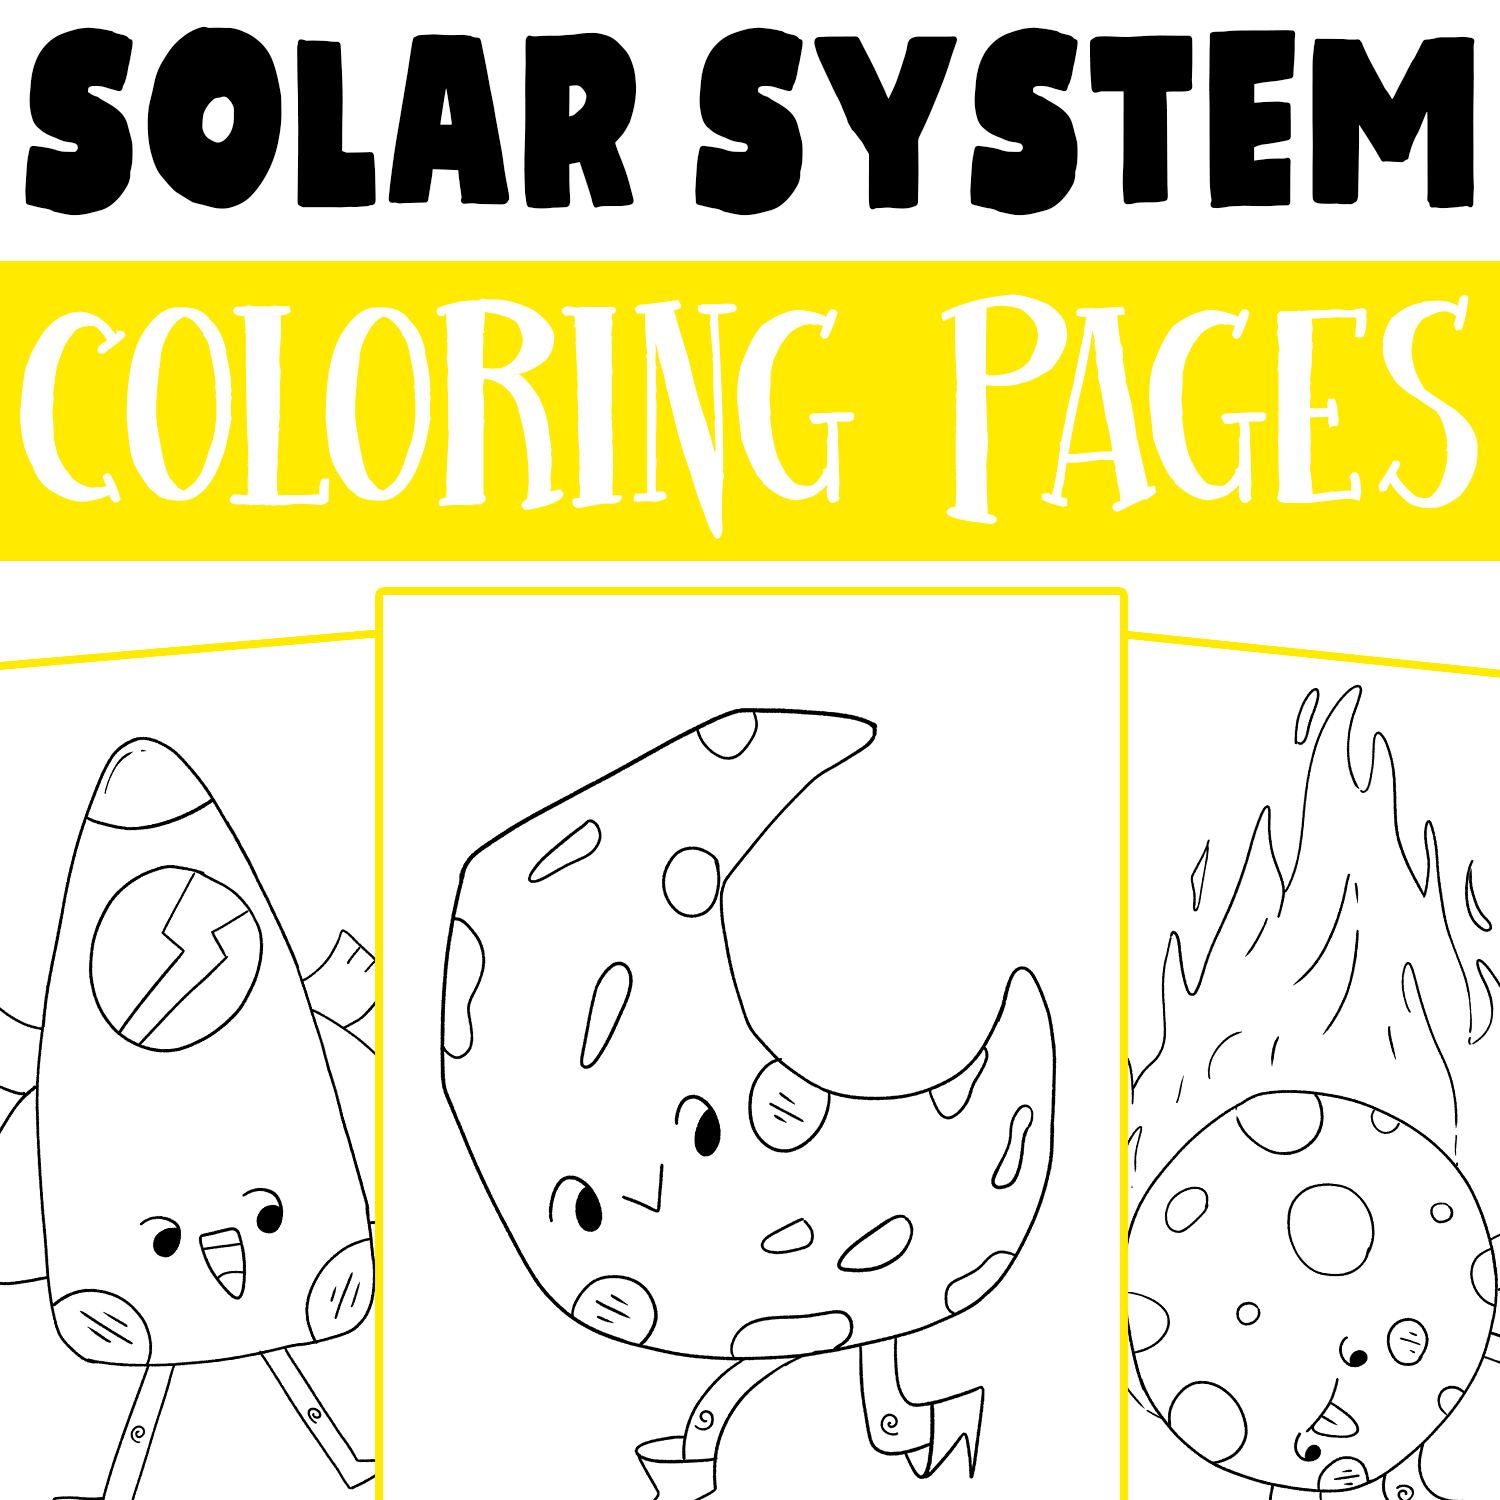 Solar system planets coloring pages astronomy science bulletin board worksheets made by teachers